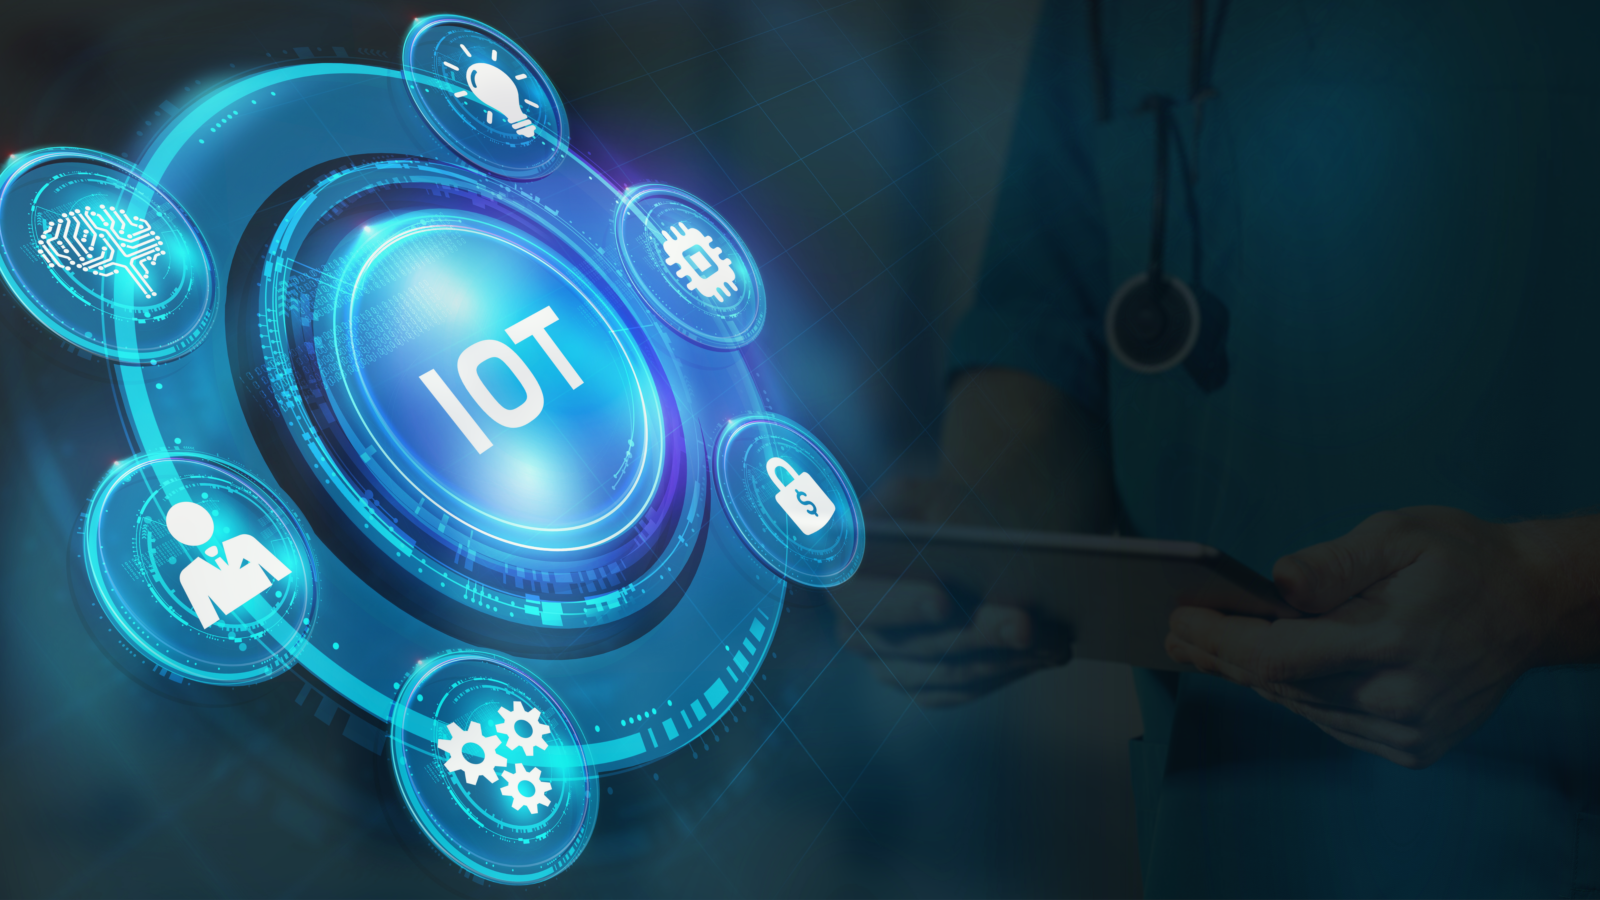 Iot in Healthcare